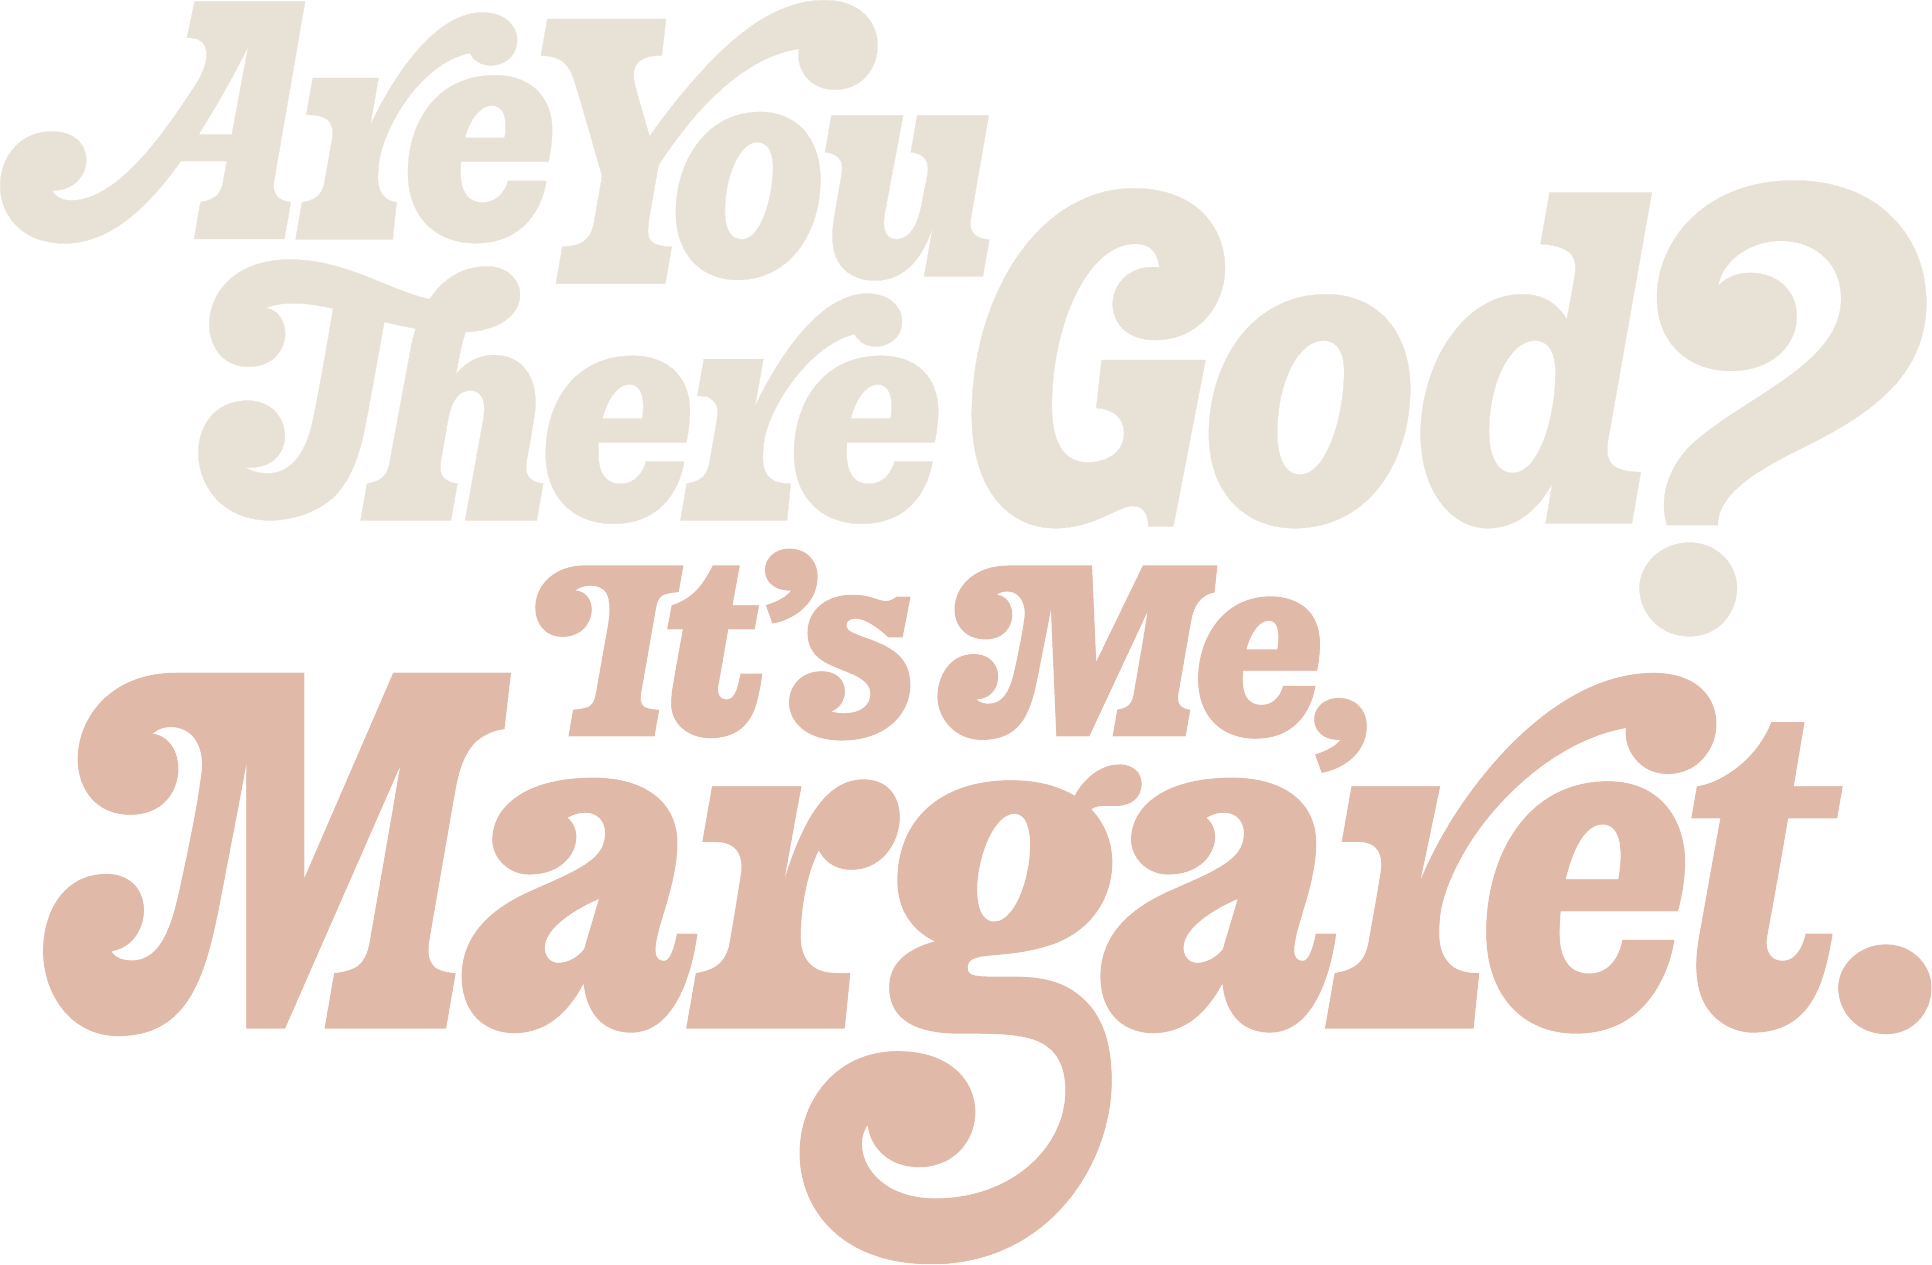 Are You There God? It's Me, Margaret. logo